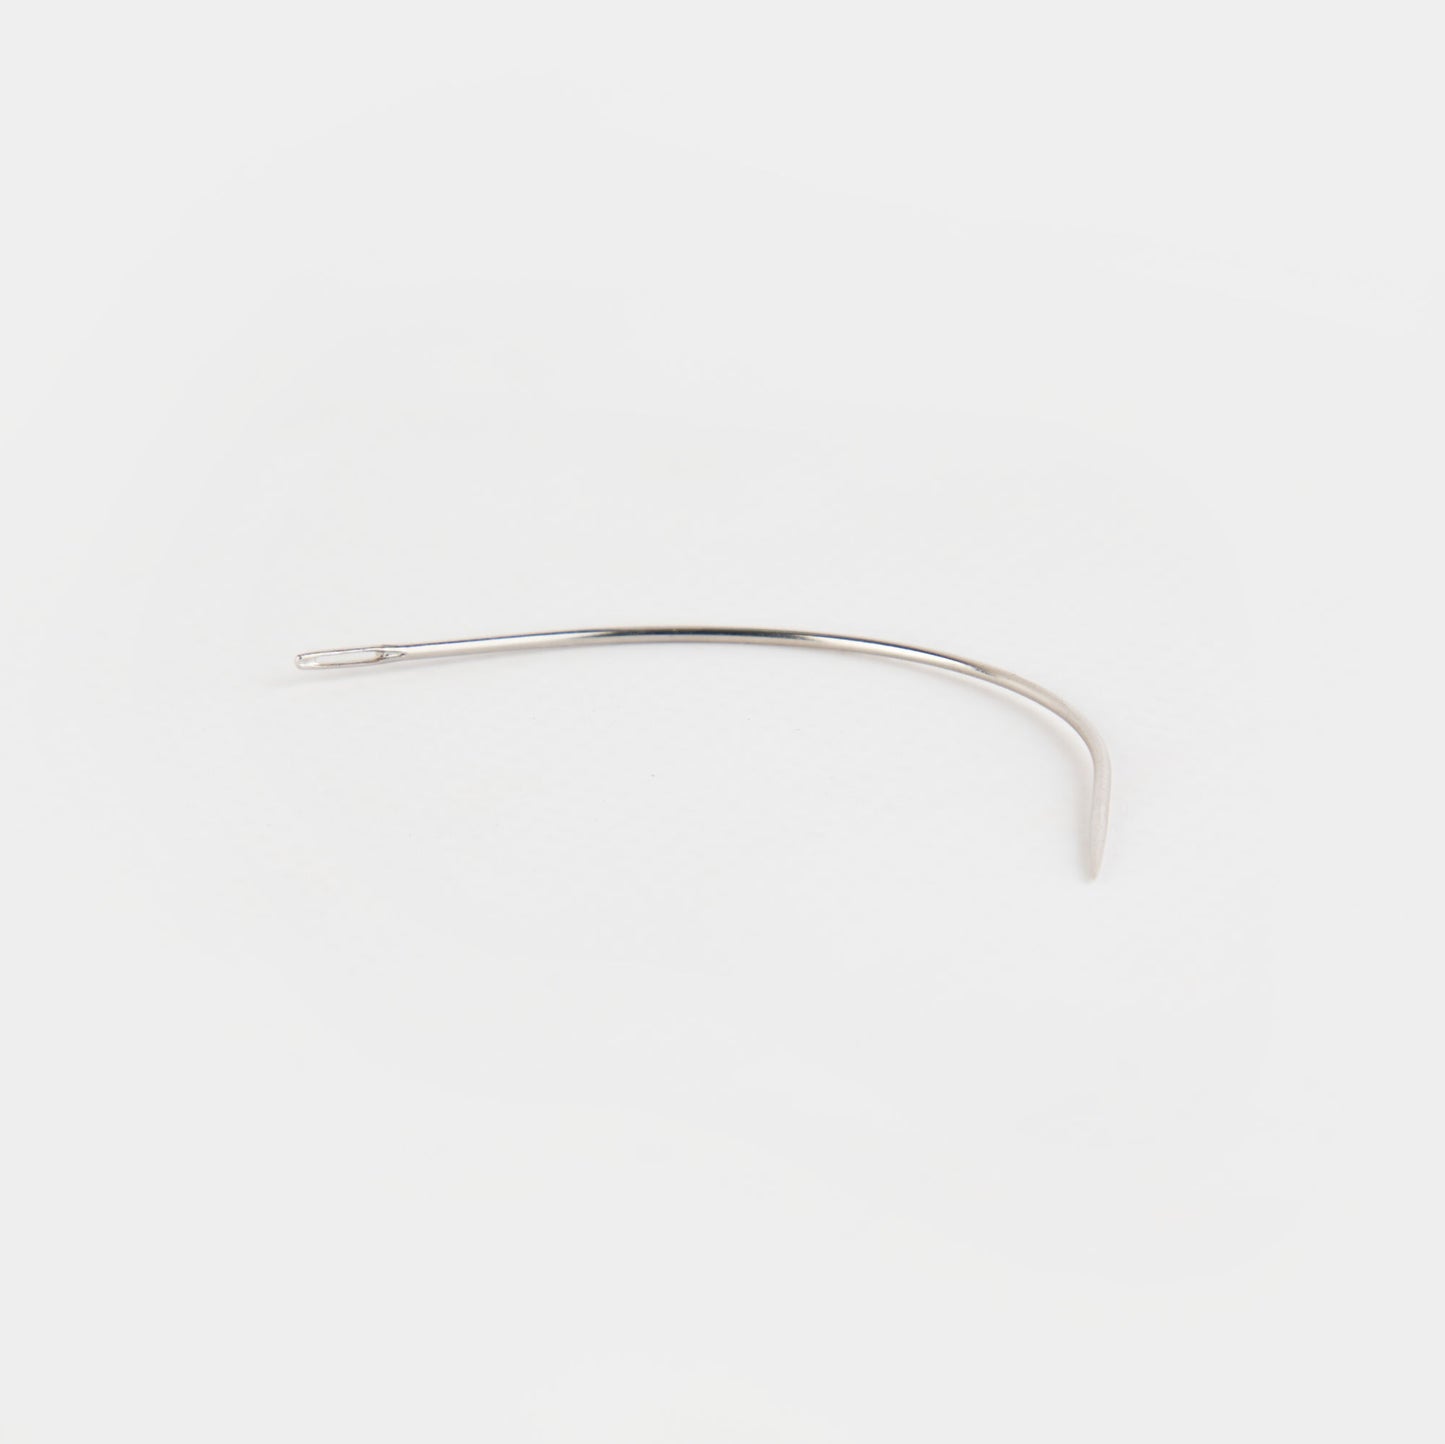 Curved Sewing Needle